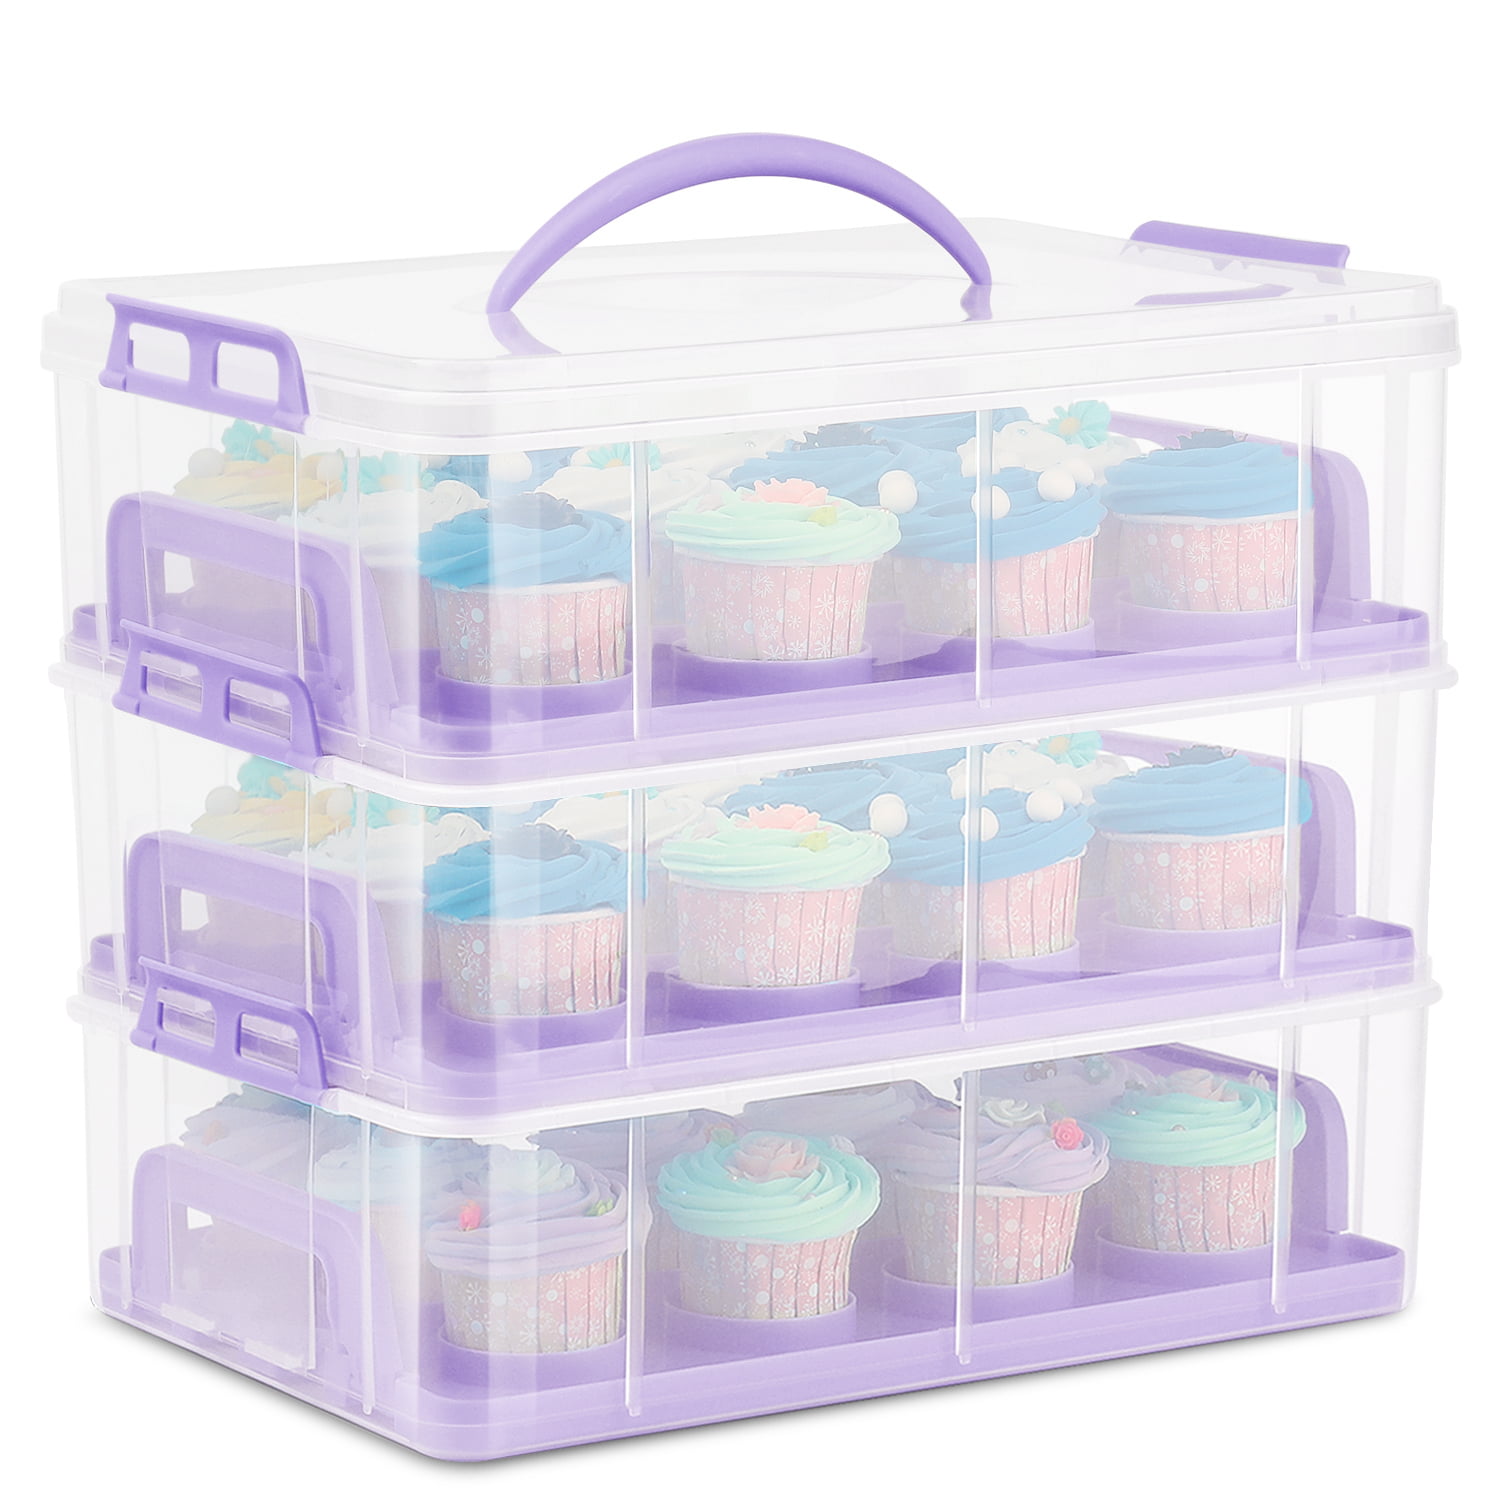 Cupcake Carrier Holder Container Box (36 Slot, 3 Tier) - 36 Cupcakes